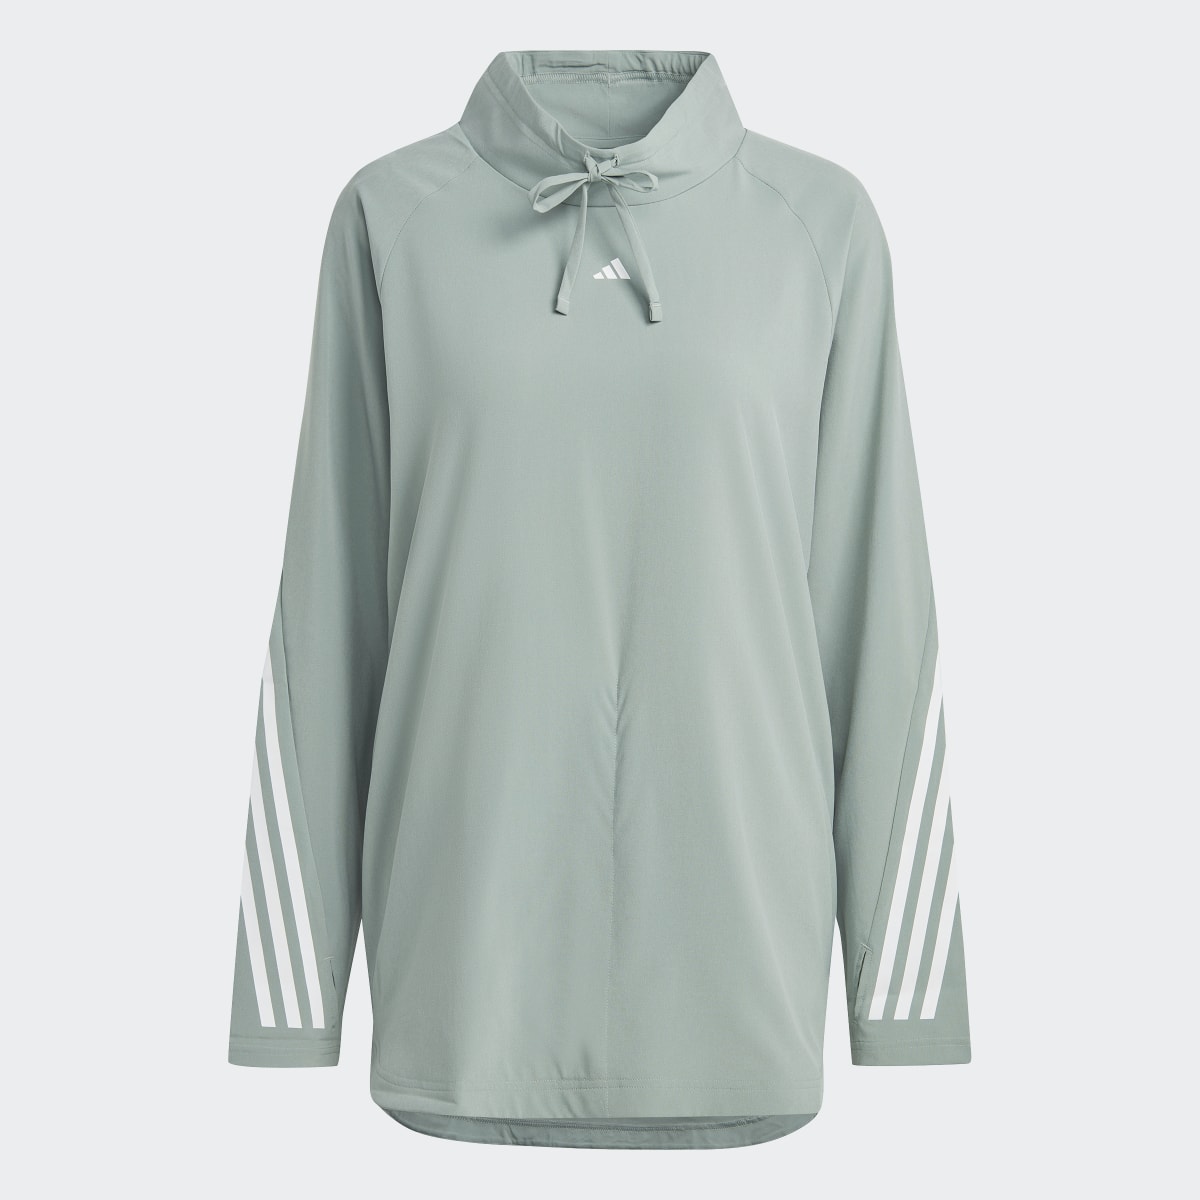 Adidas Train Icons Full-Cover Top. 5